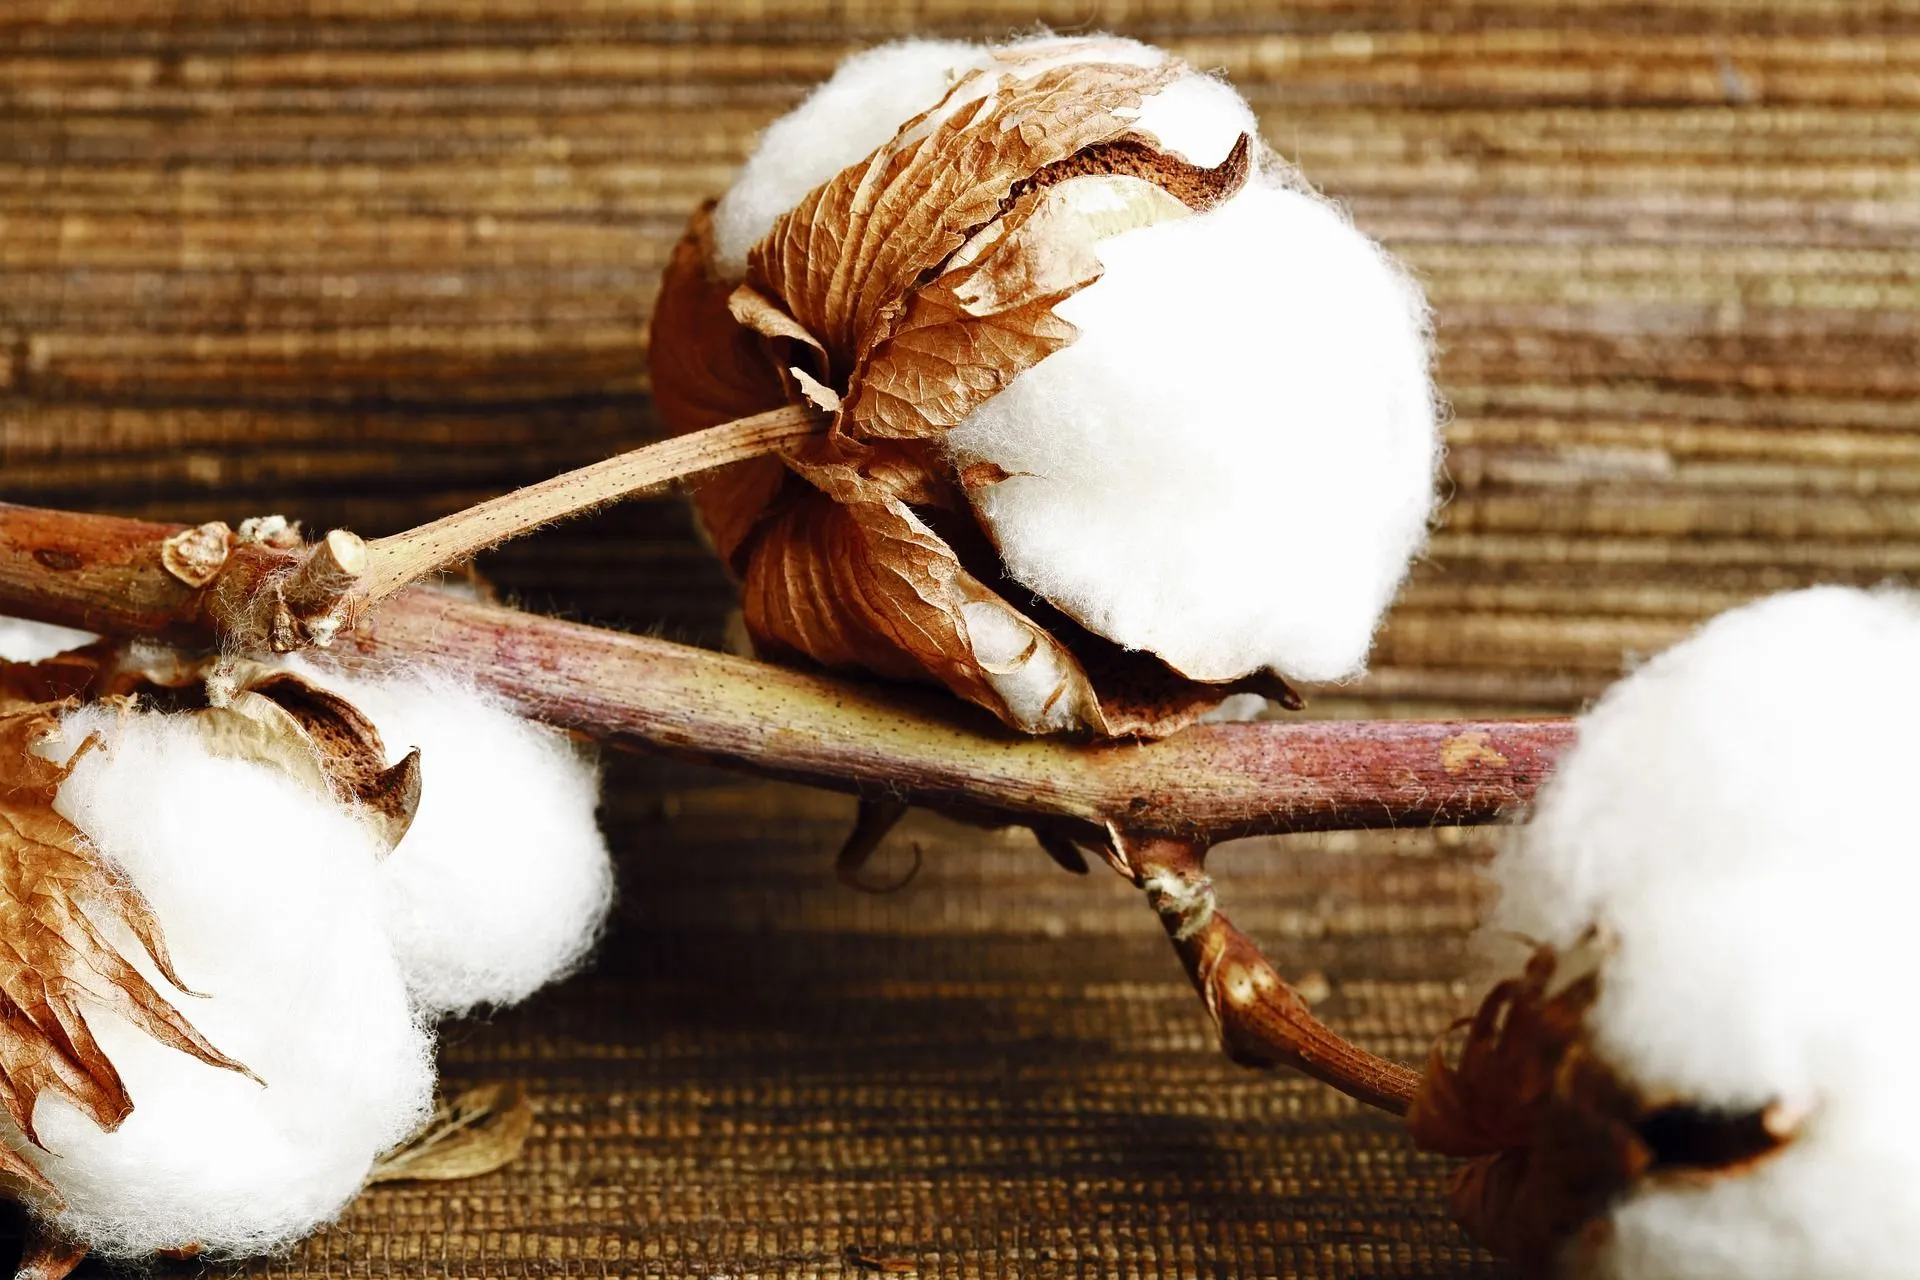 The white cotton is a natural fiber having a soft, hollow texture and can be seen around us in almost every product that we use.